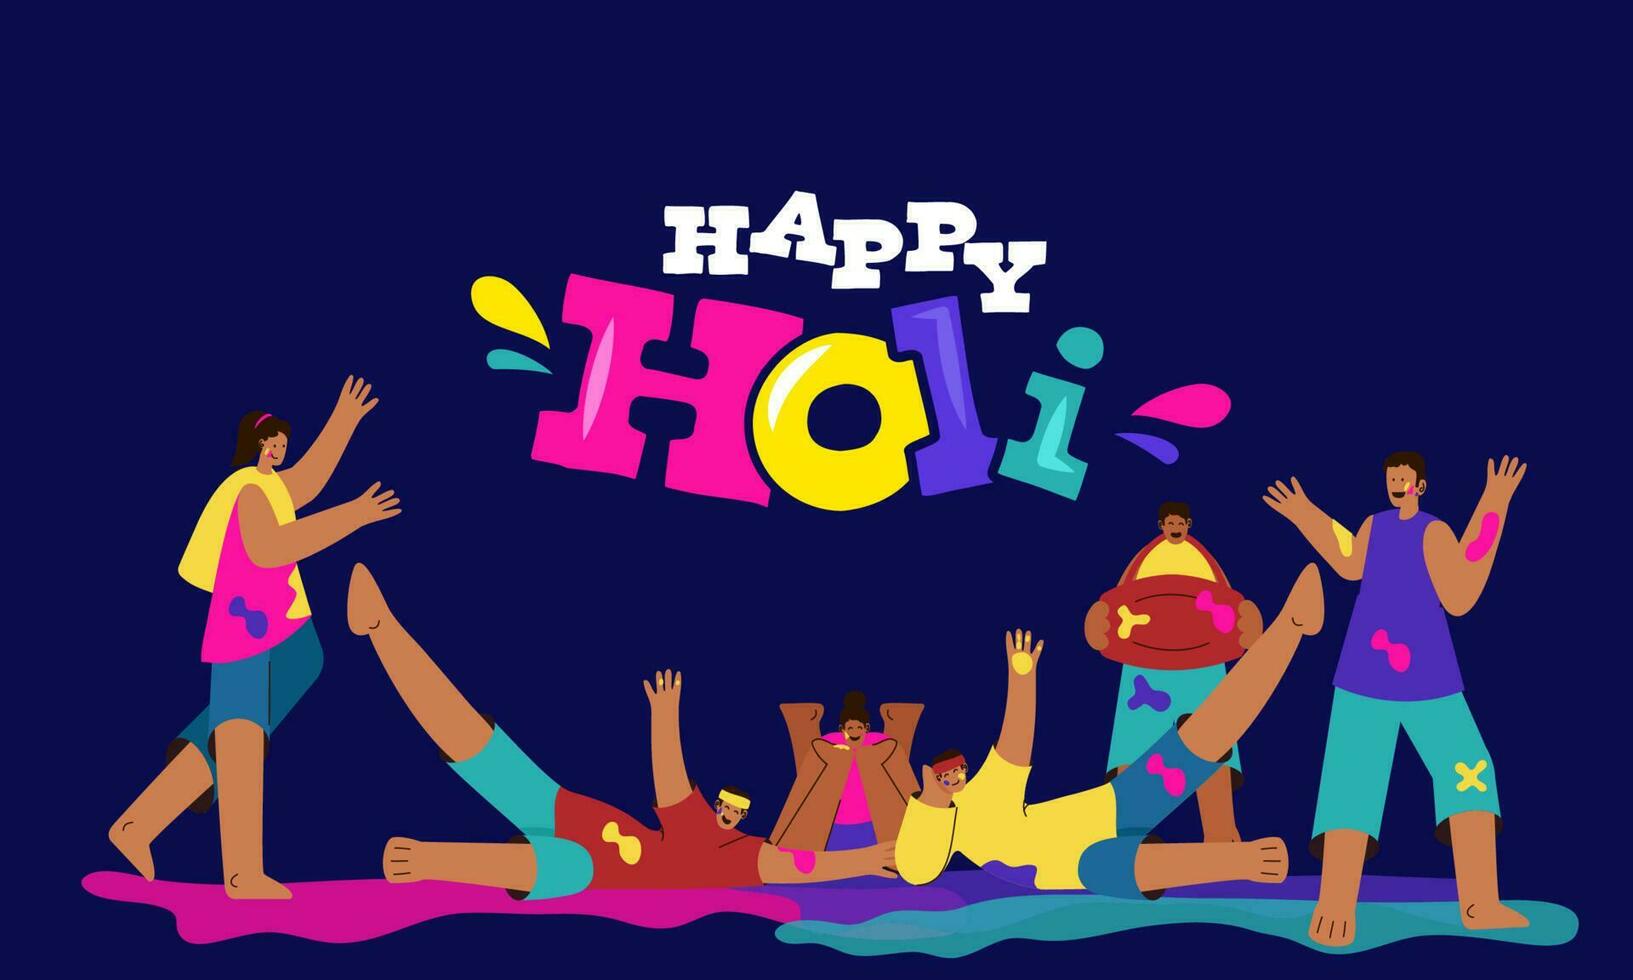 Portrait Of Indian People Playing With Colors On Blue Background For Happy Holi Celebration Concept. vector